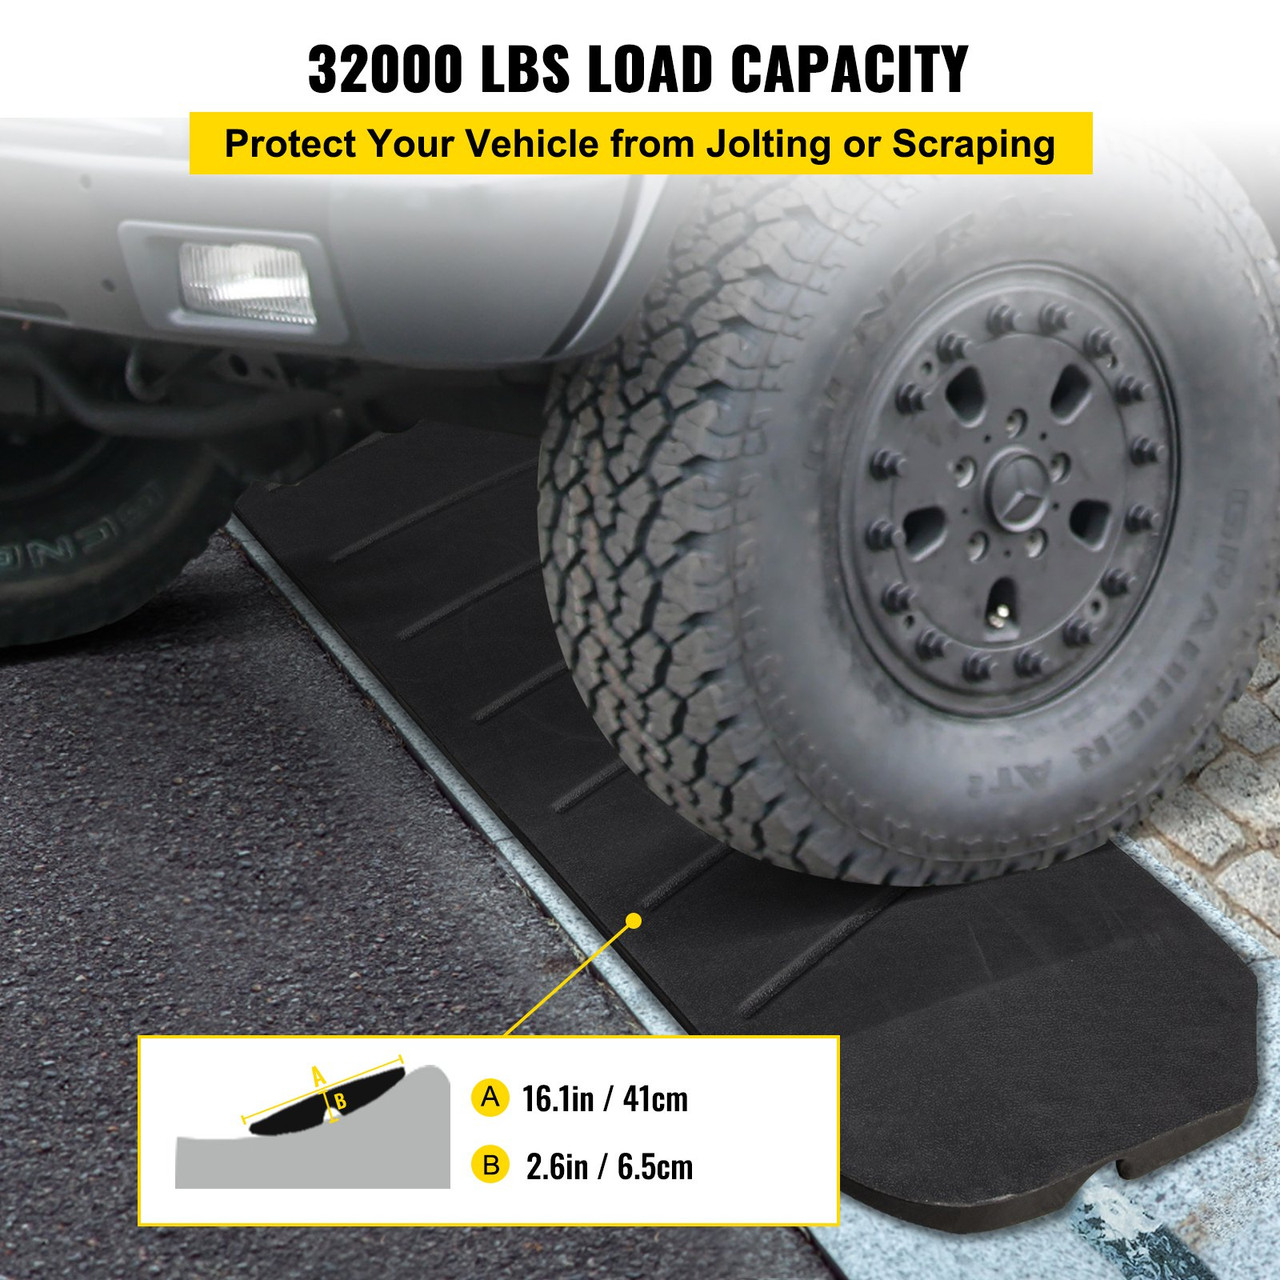 Curb Ramp, 5 Pack Rubber Driveway Ramps, Heavy Duty 32000 lbs Weight Capacity Threshold Ramp, 2.6 inch High Curbside Bridge Ramps for Loading Dock Garage Sidewalk, Expandable Full Ramp Set